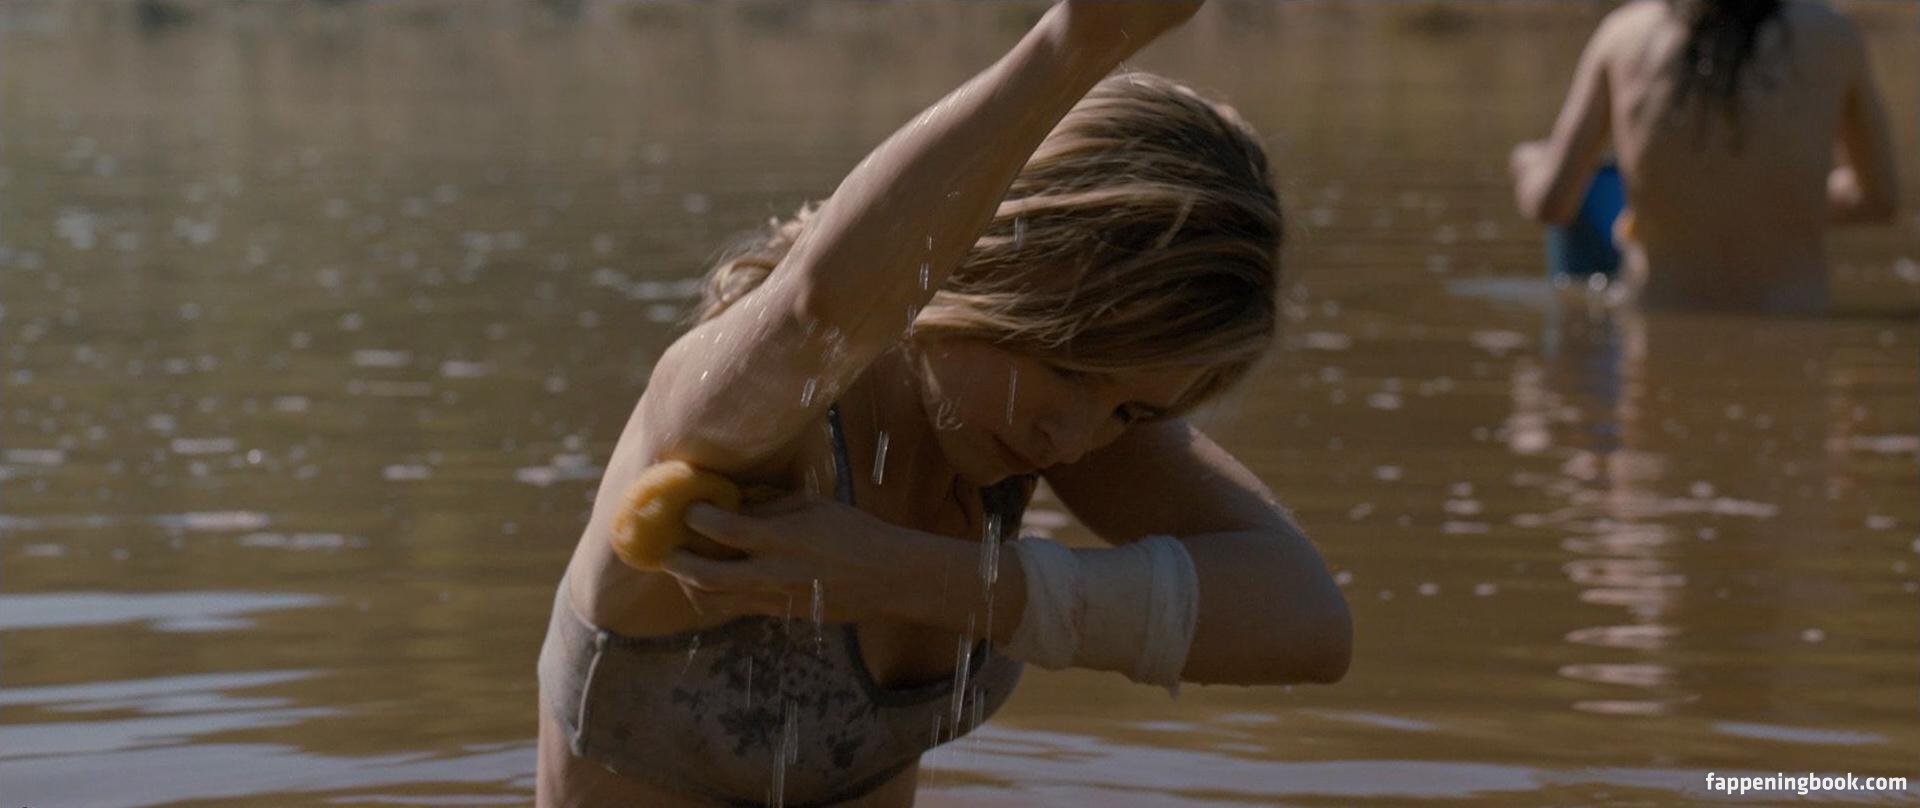 Topless brit marling 